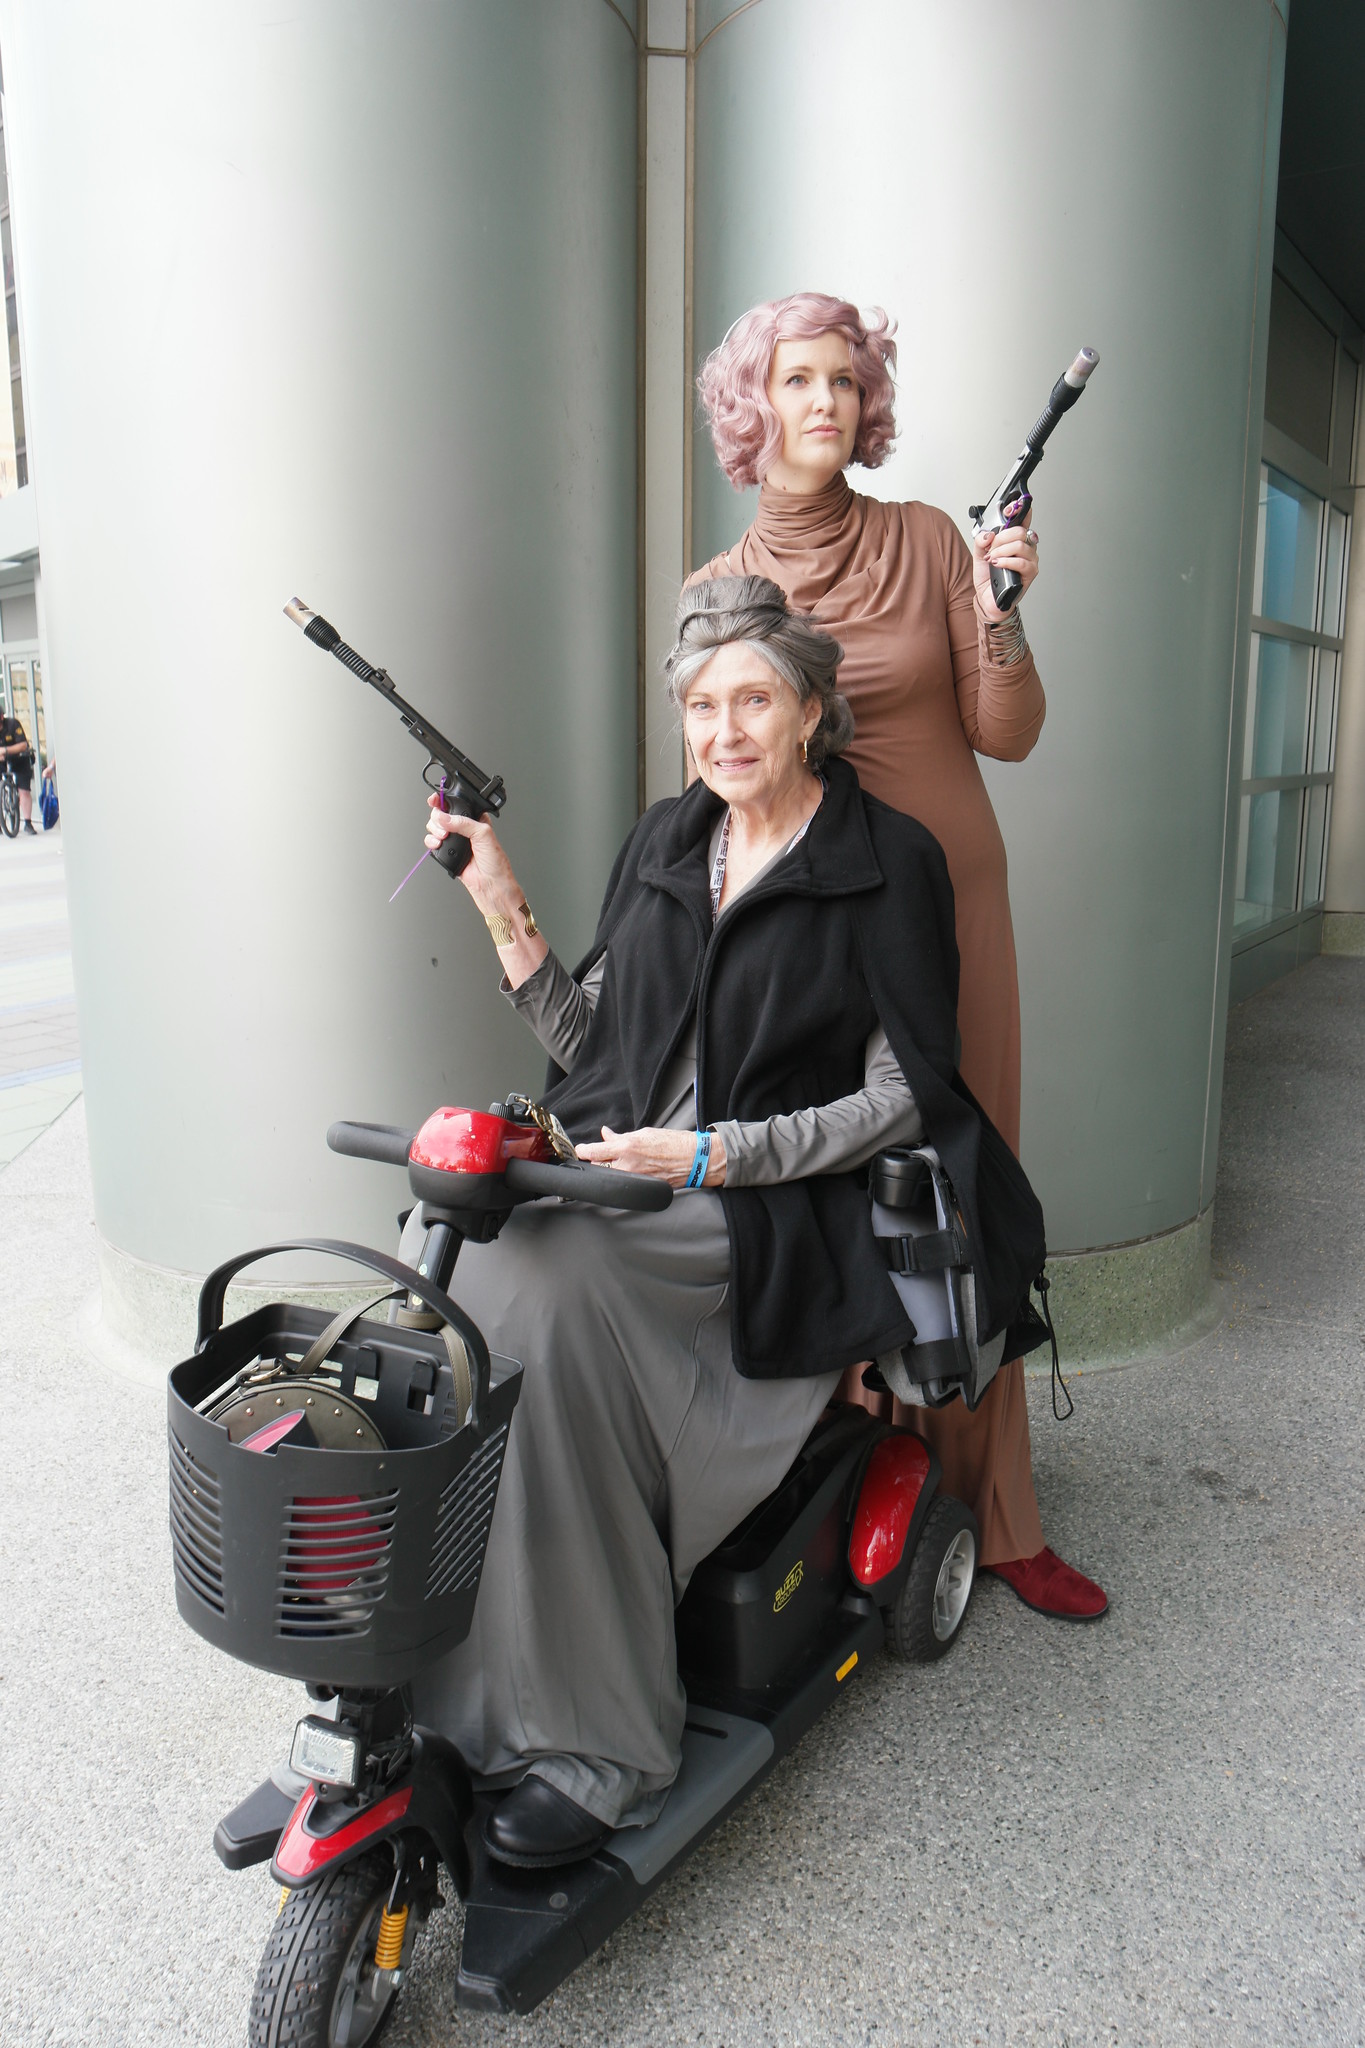 An older white woman with grey hair sits on a scooter dressed as General Leia. Behind her stands another woman with pink hair. They are each holding up blaster pistols.